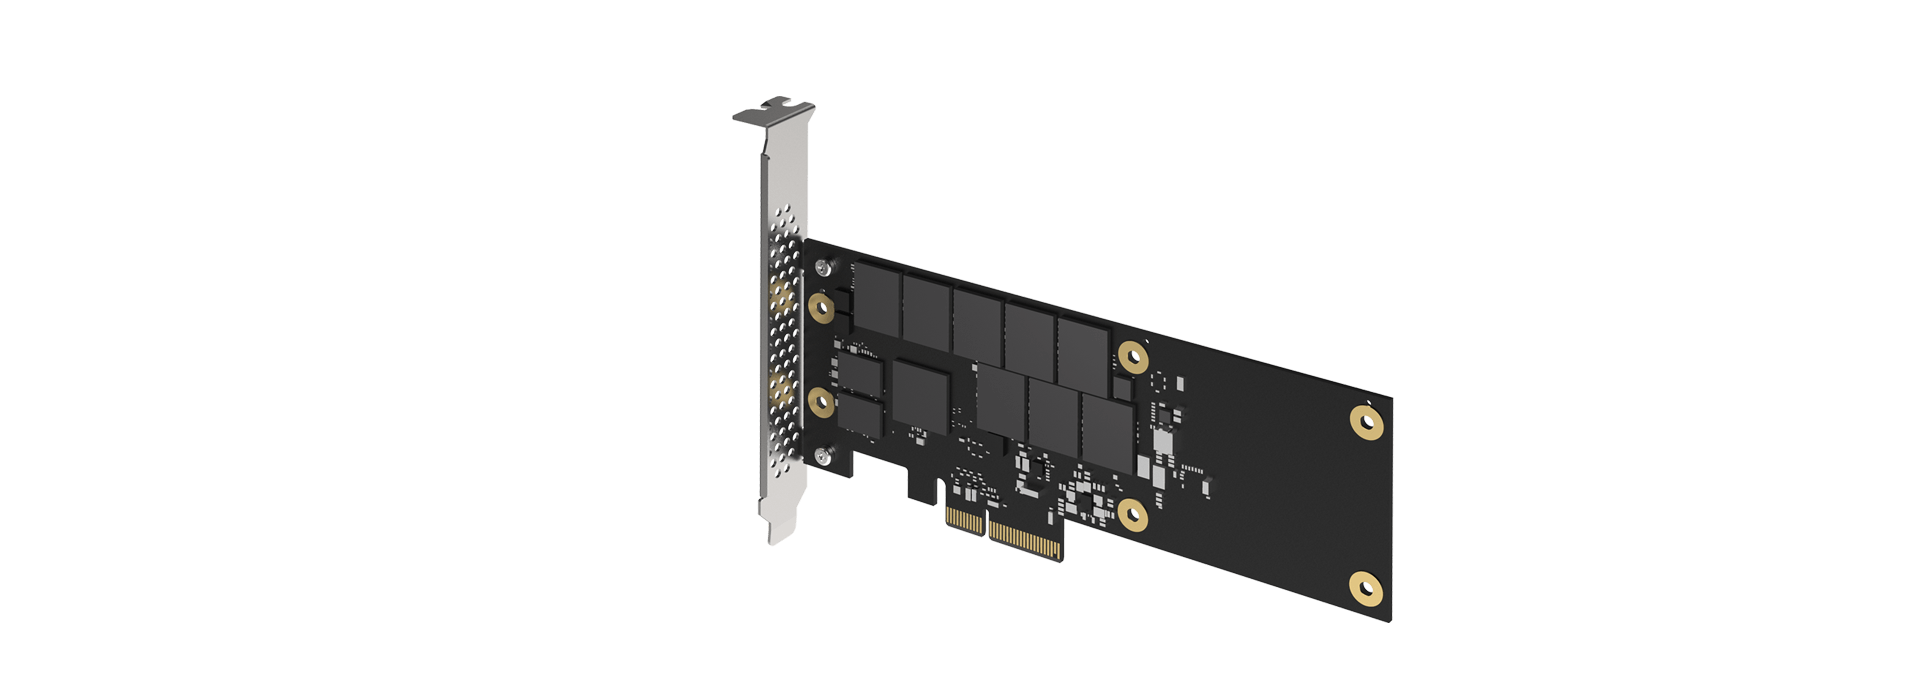 GIGABYTE NVMe SSD 1TB Key Features